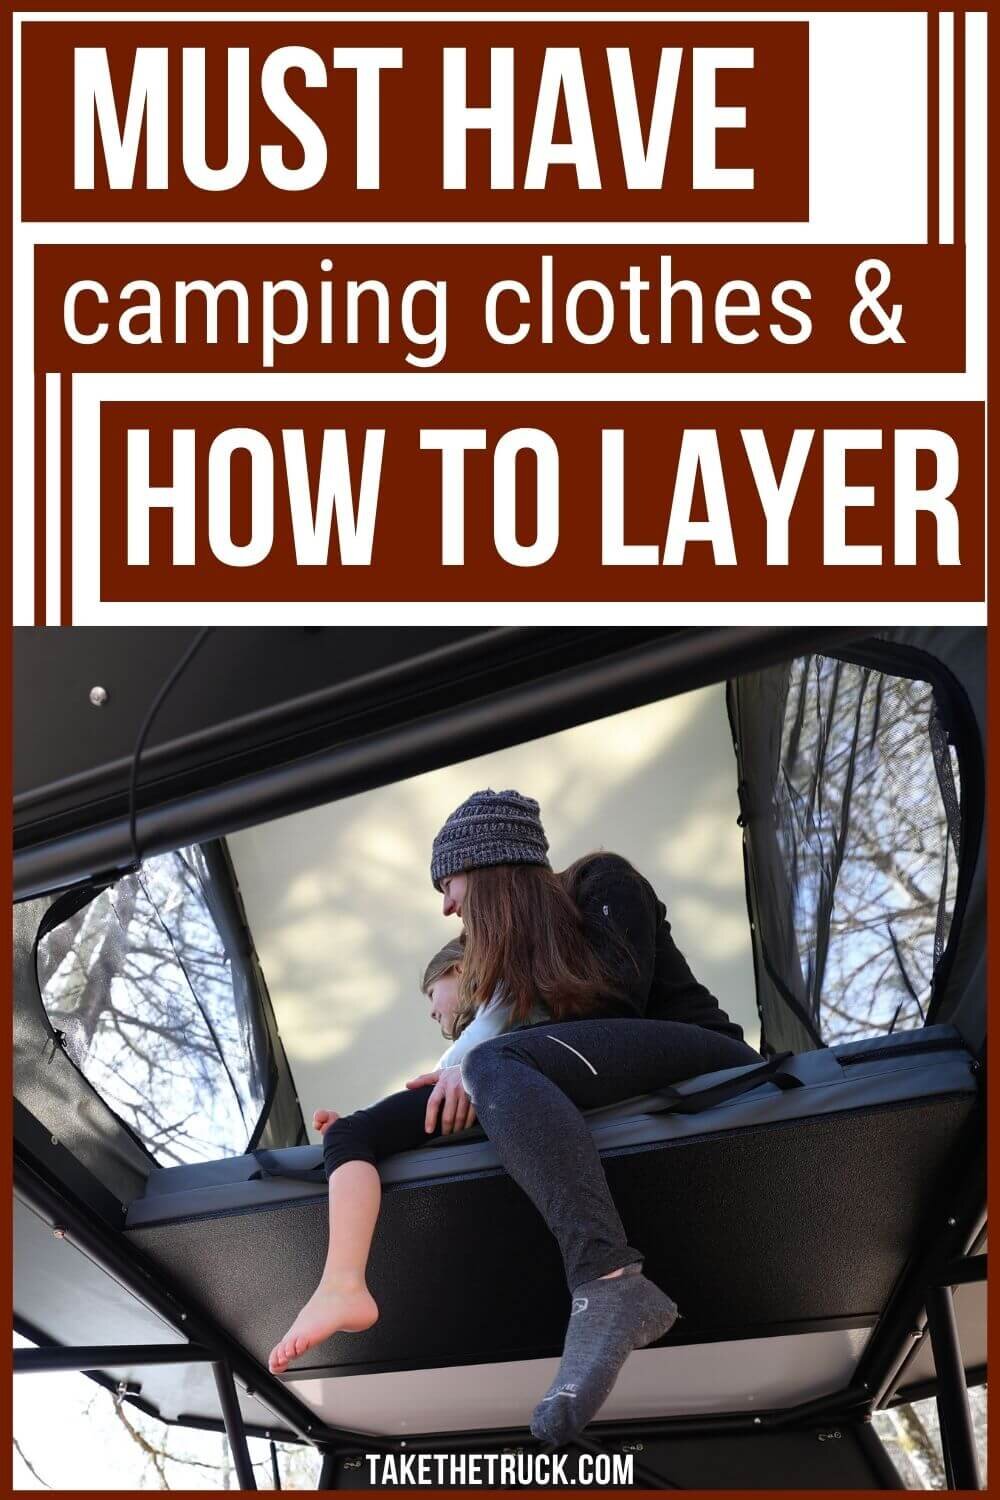 All about what to wear while camping, layering clothes for camping, camping clothes for men, camping clothes for women, and must have camping clothes.